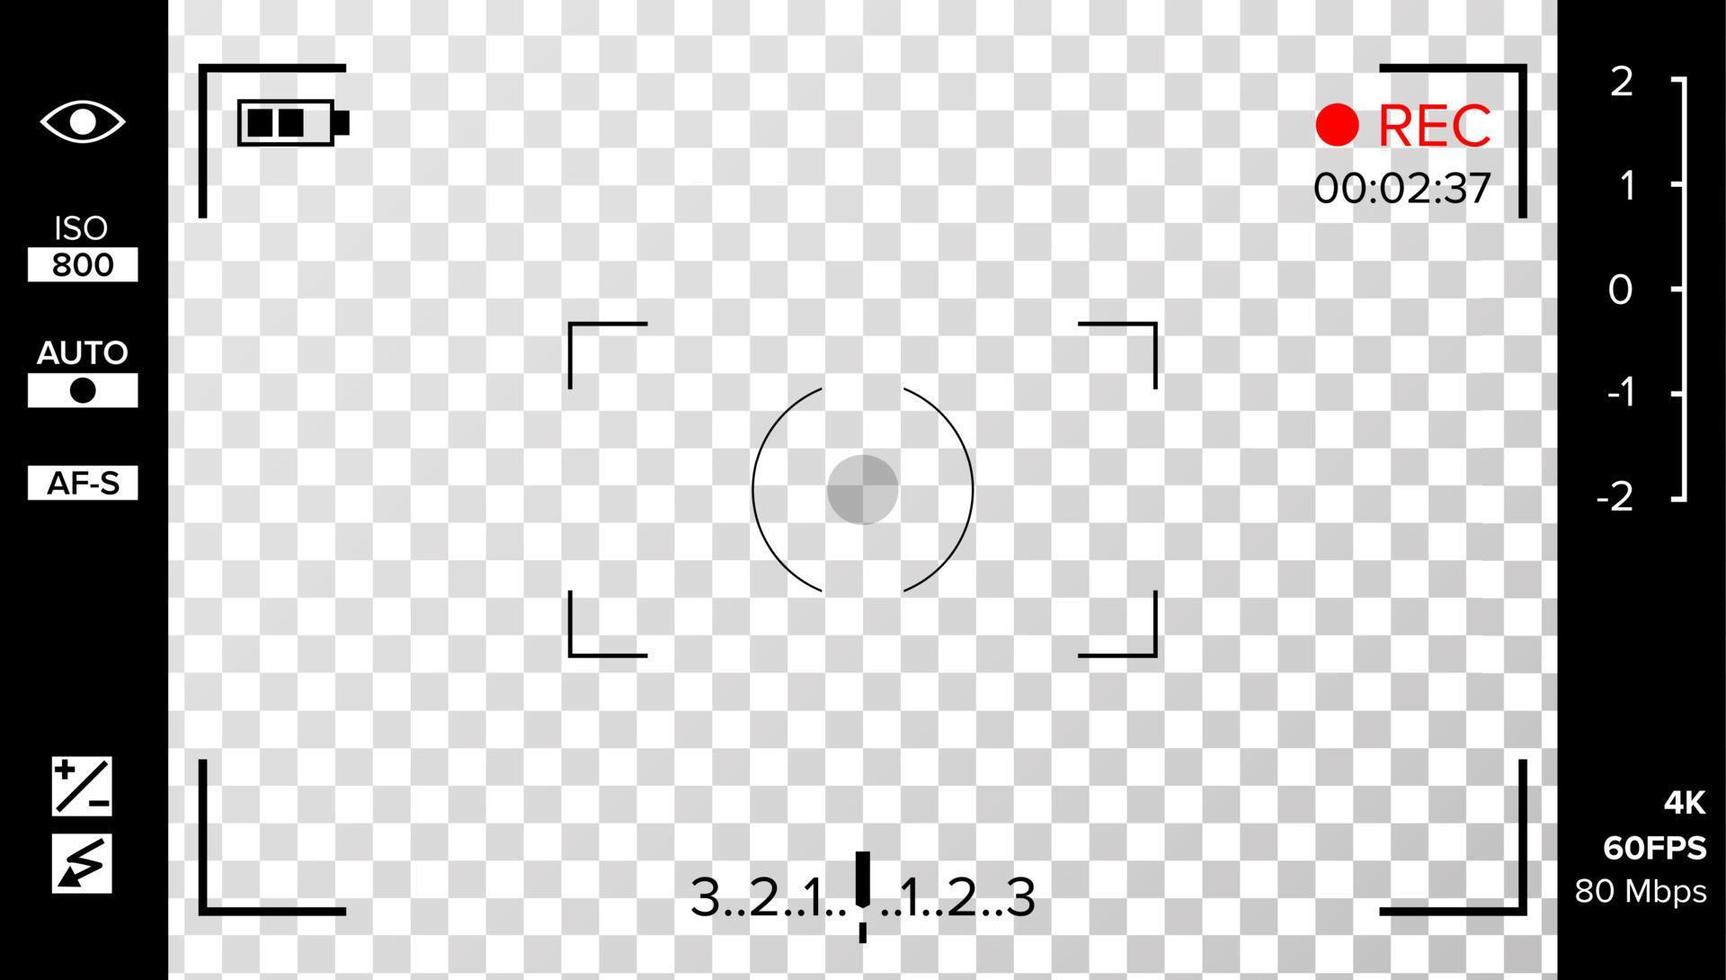 Camera Viewfinder Vector. Photo Or Video Camera Grid With Shooting Settings And Options On Screen. Recording Led Blinked. Realistic Corner Fall Off Background vector